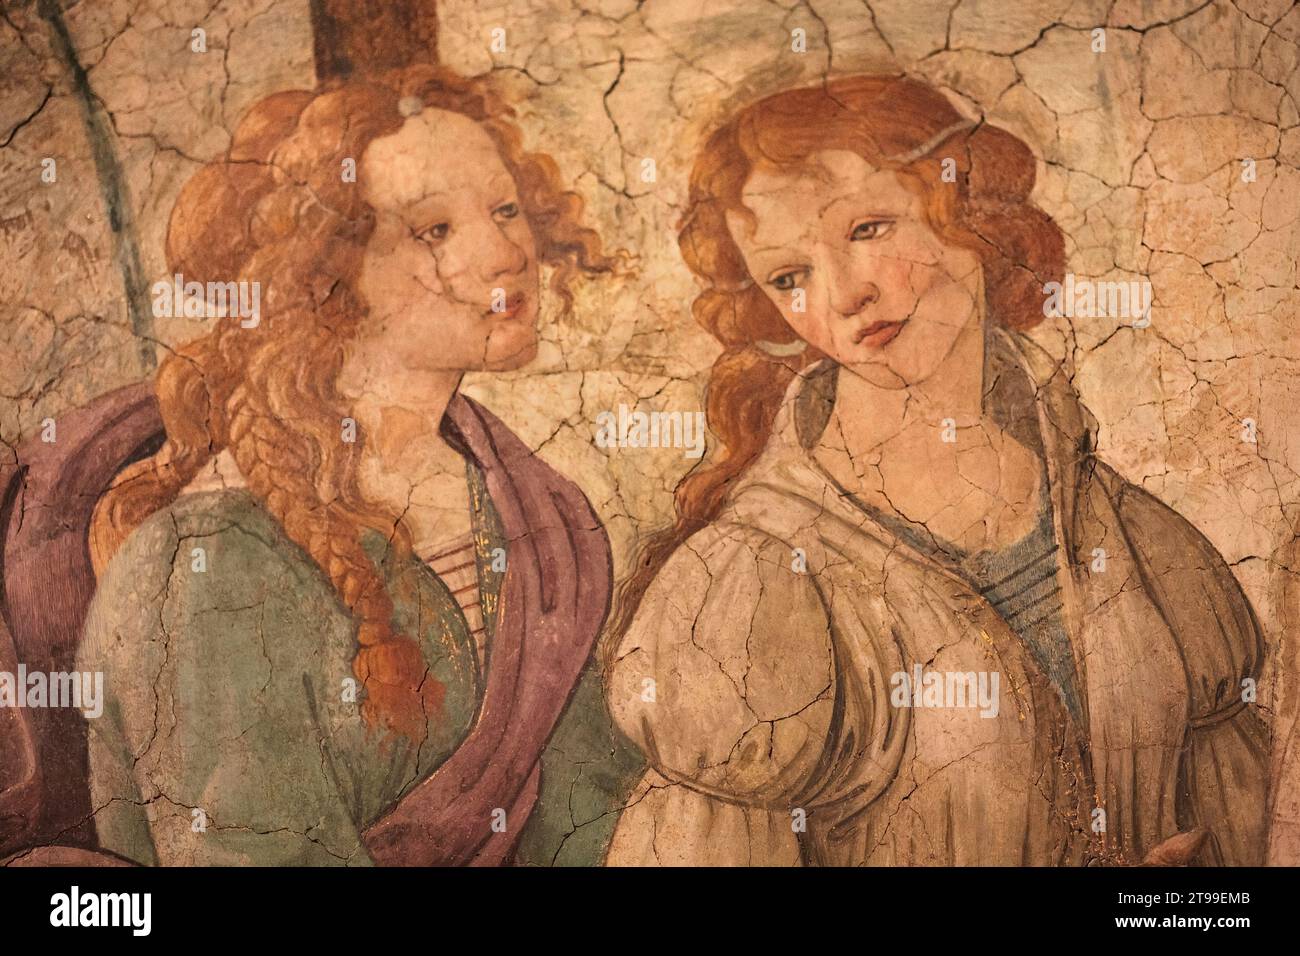 Detail of Venus and the Three Graces fresco by Sandro Botticelli in the Louvre Museum, Paris, France. Stock Photo